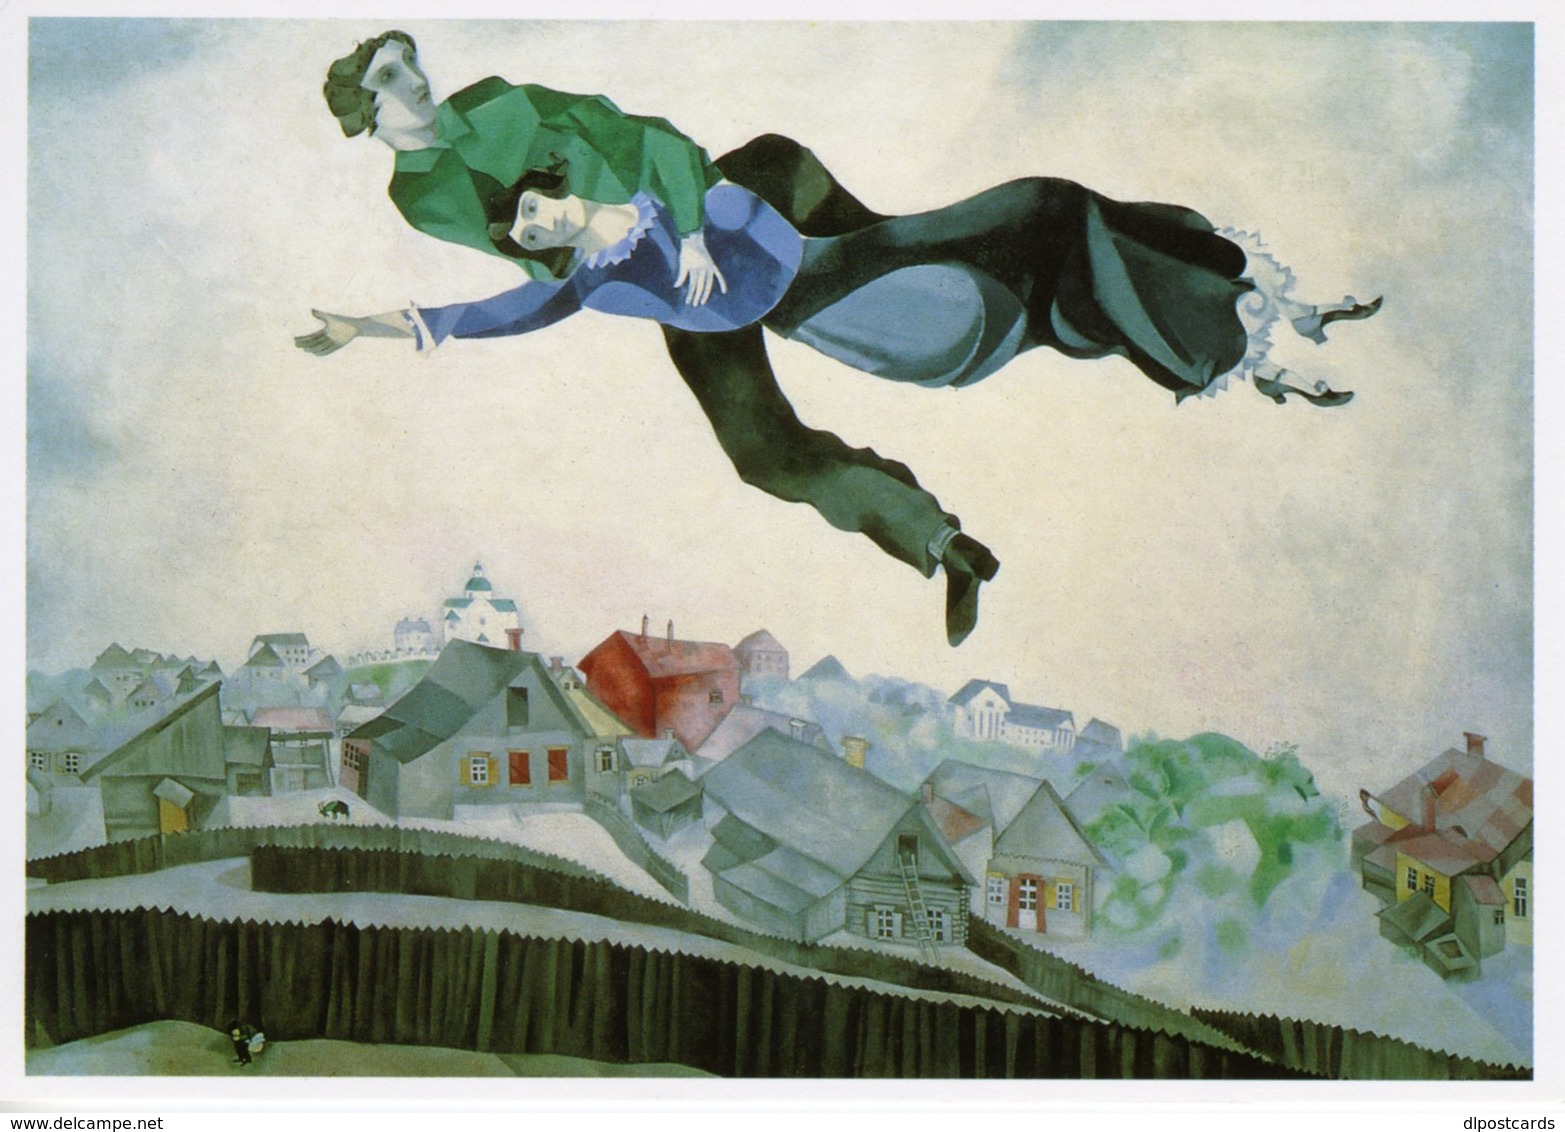 Marc Chagall Artist 'Over The Town' Art Artwork The Jewish Museum Postcard Z1 - Paintings